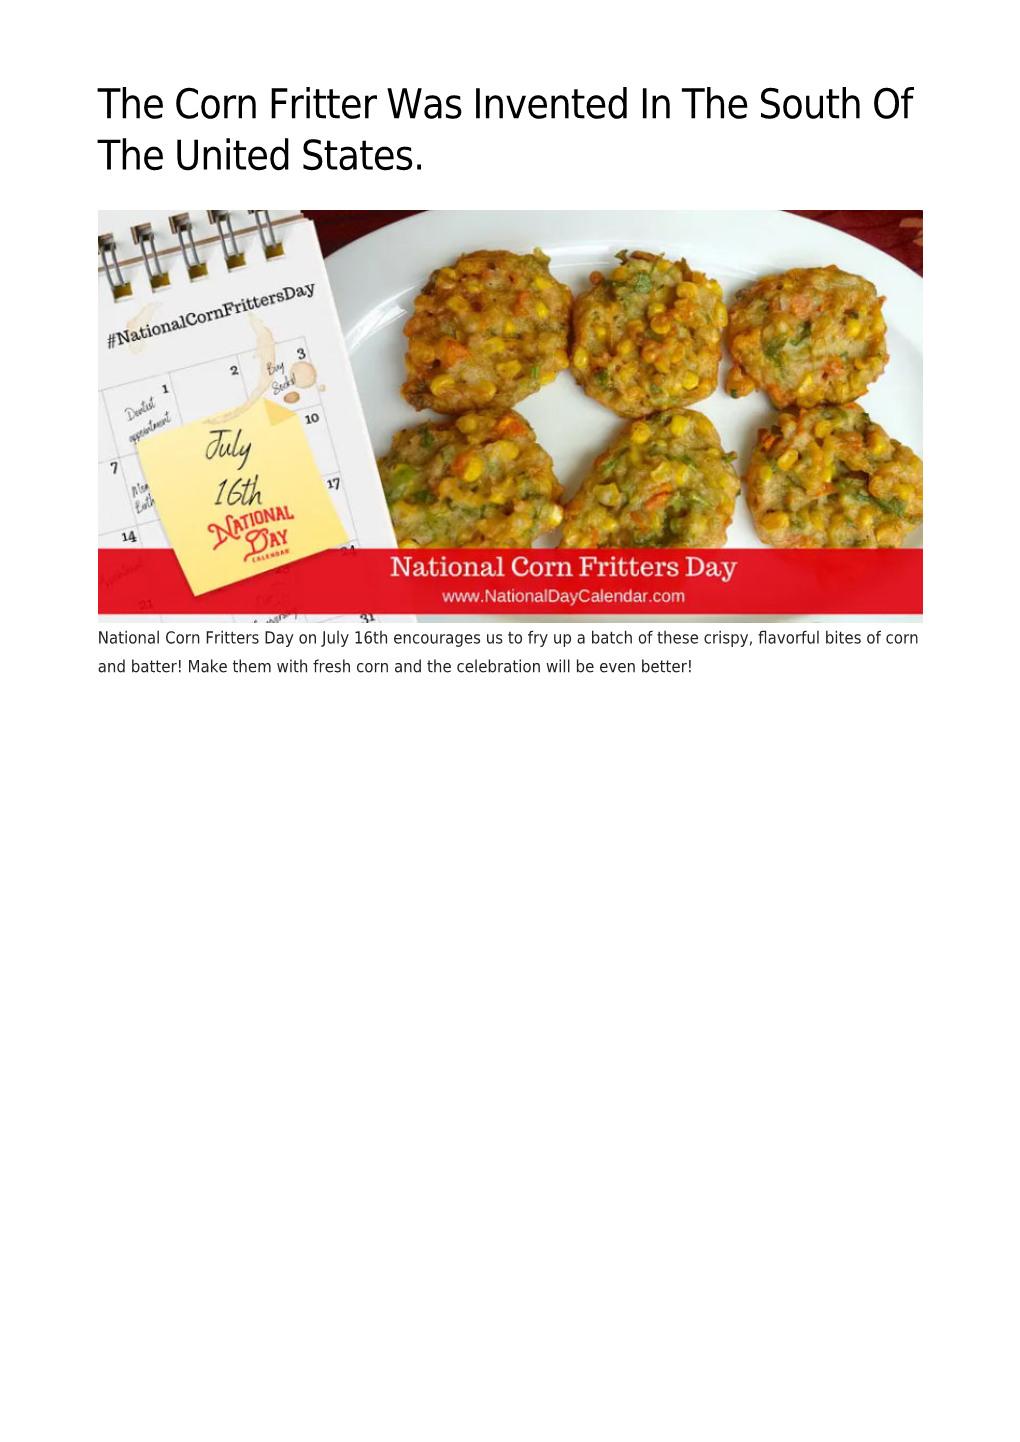 The Corn Fritter Was Invented in the South of the United States